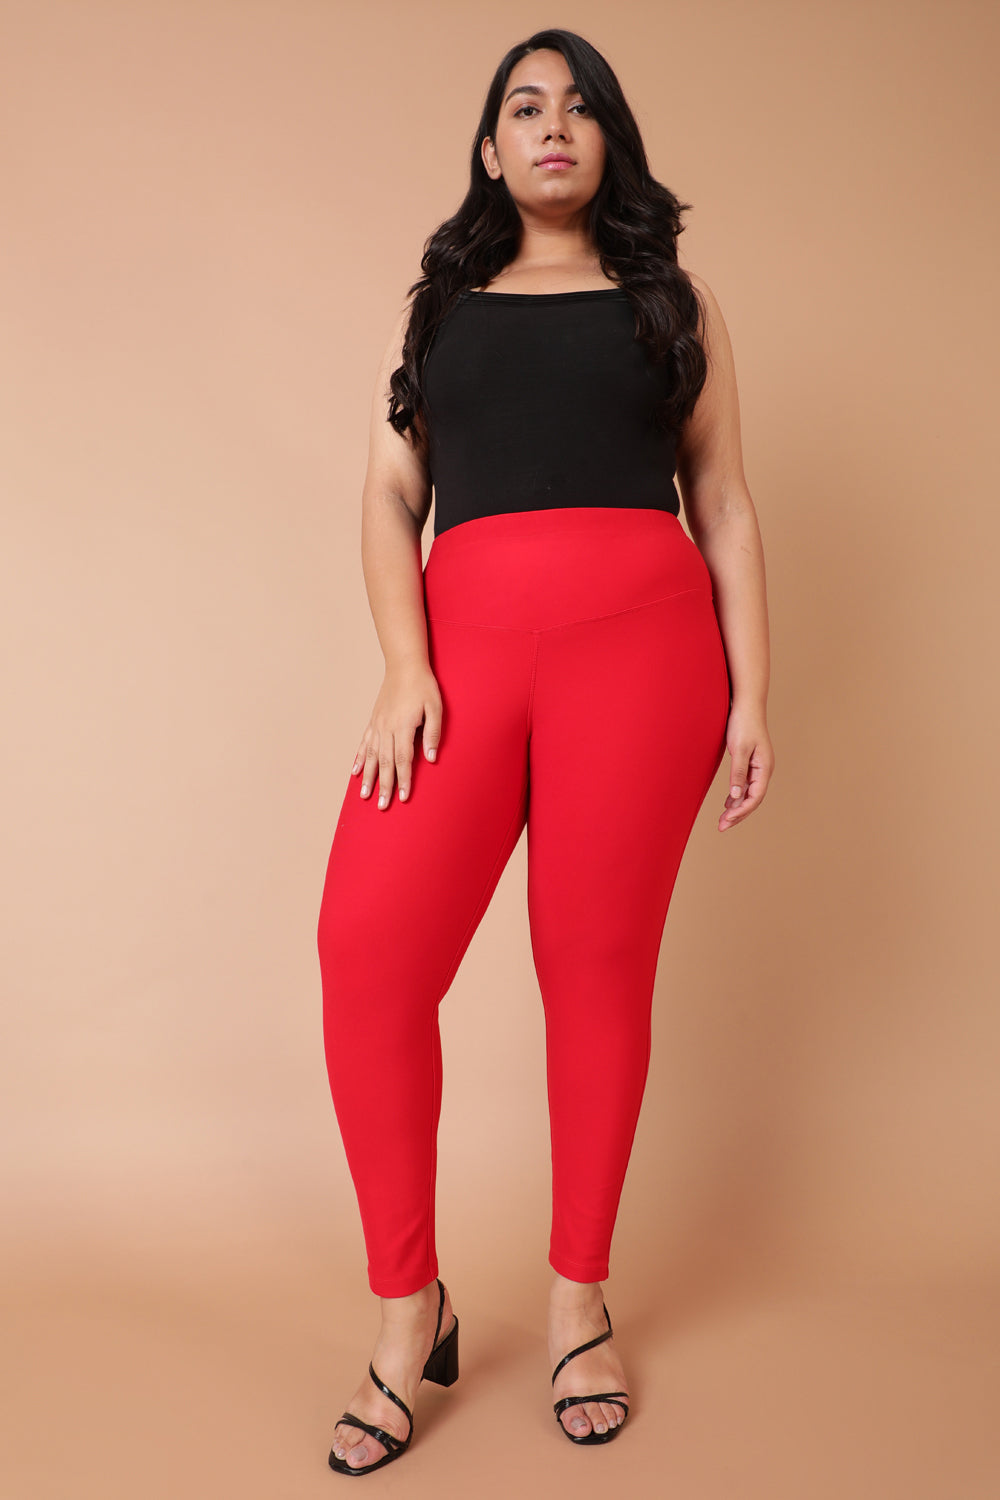 Buy 5 Tummy Tuck jeggings for women red Online In India At Discounted Prices